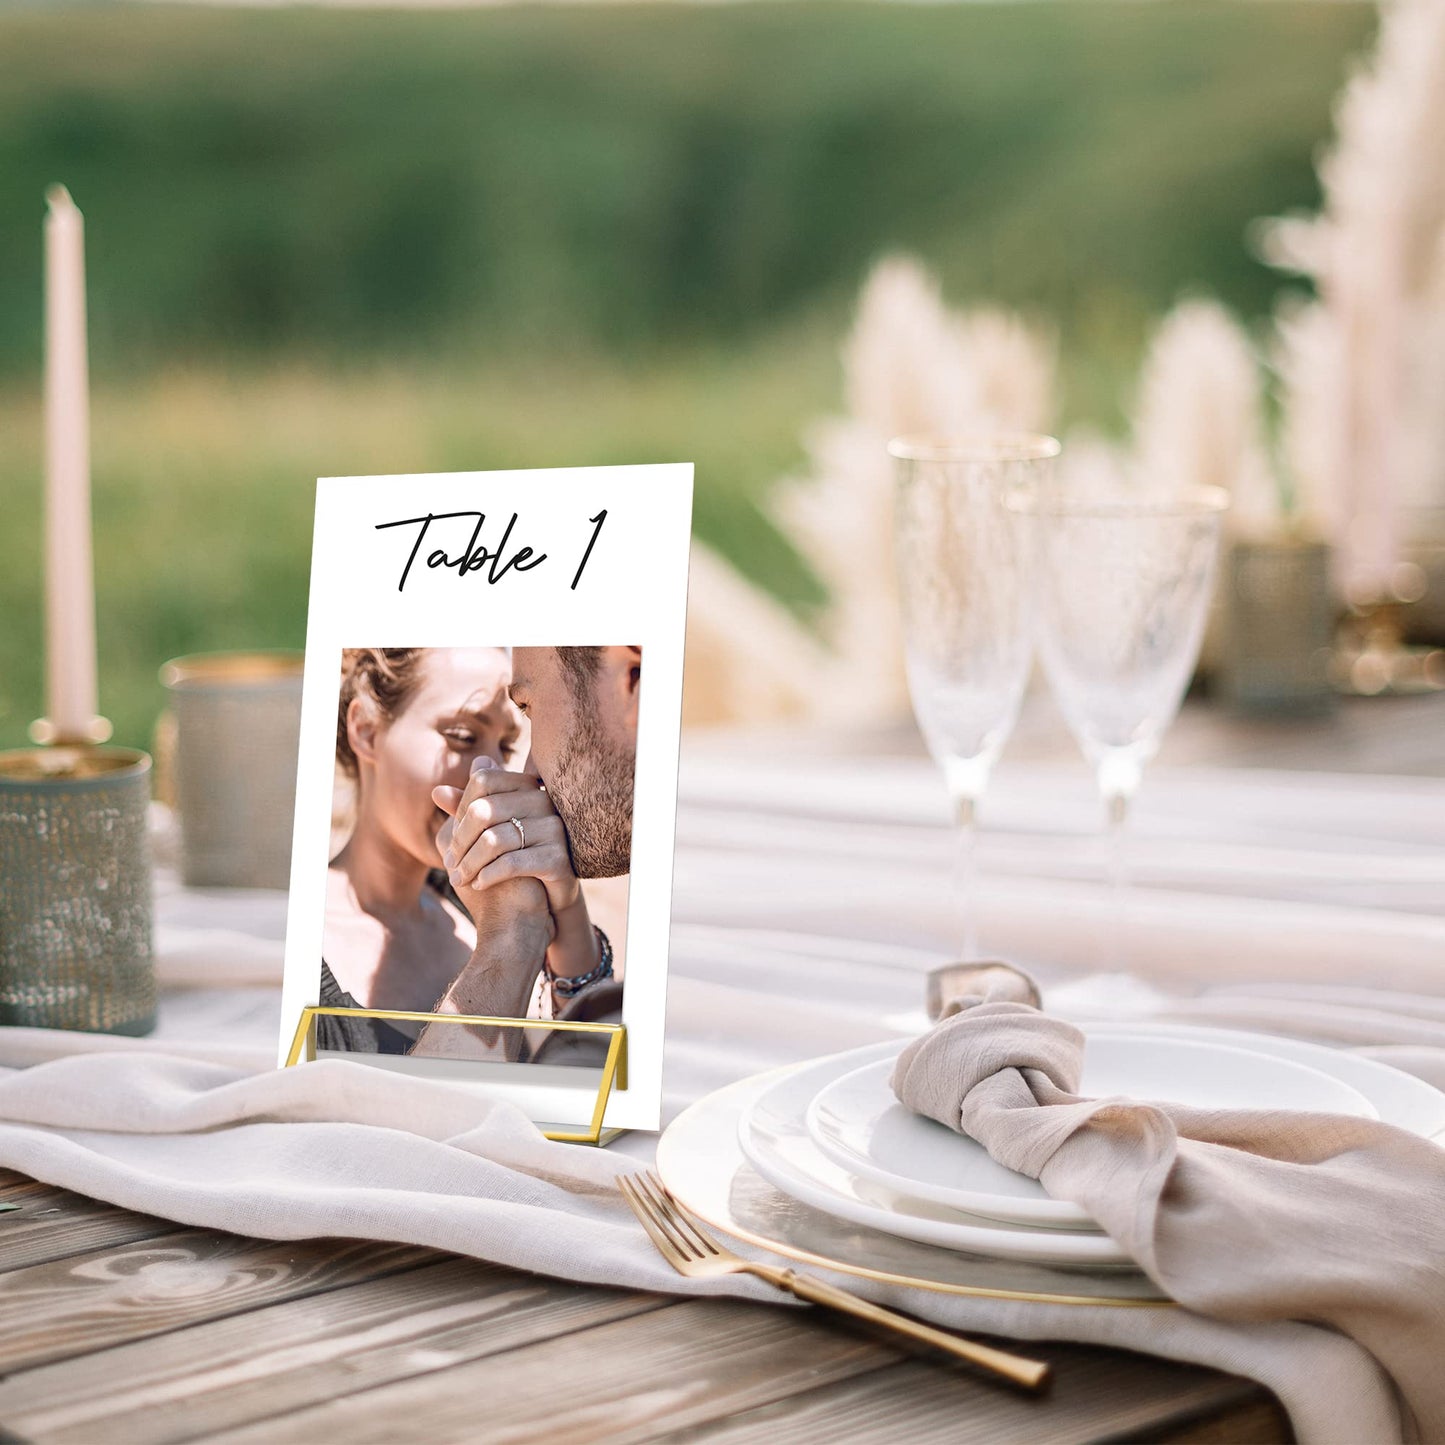 Gorgeous Photo Wedding Table Number Cards w/ Space For Personal Photos - Modern Double Sided Cards for Personal 4x6" Photos That Add a Personal Touch to Your Wedding - Black Lettering & Numbered 1-25